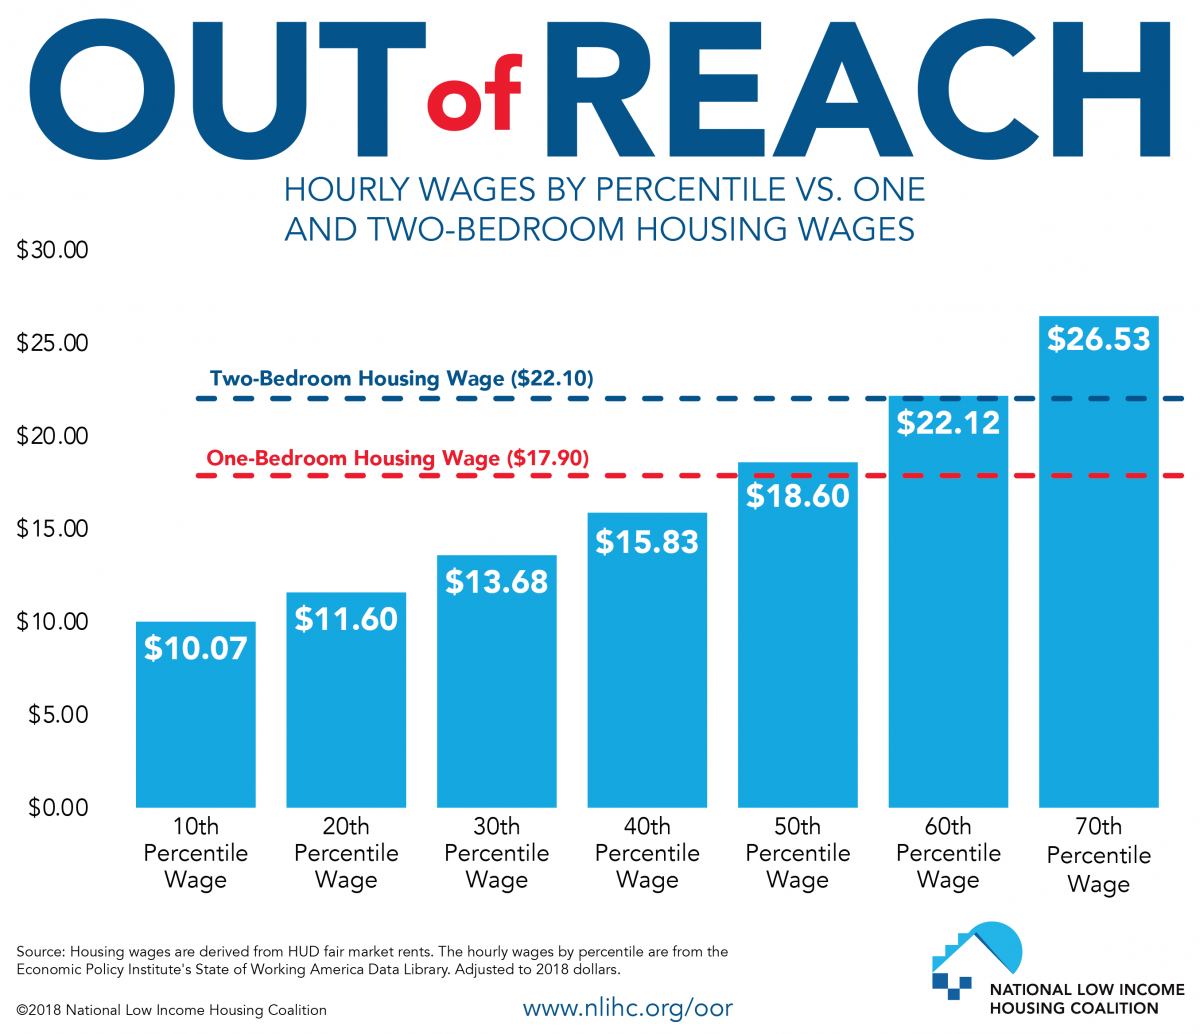 Hourly Wages by Percentile and Housing Wage